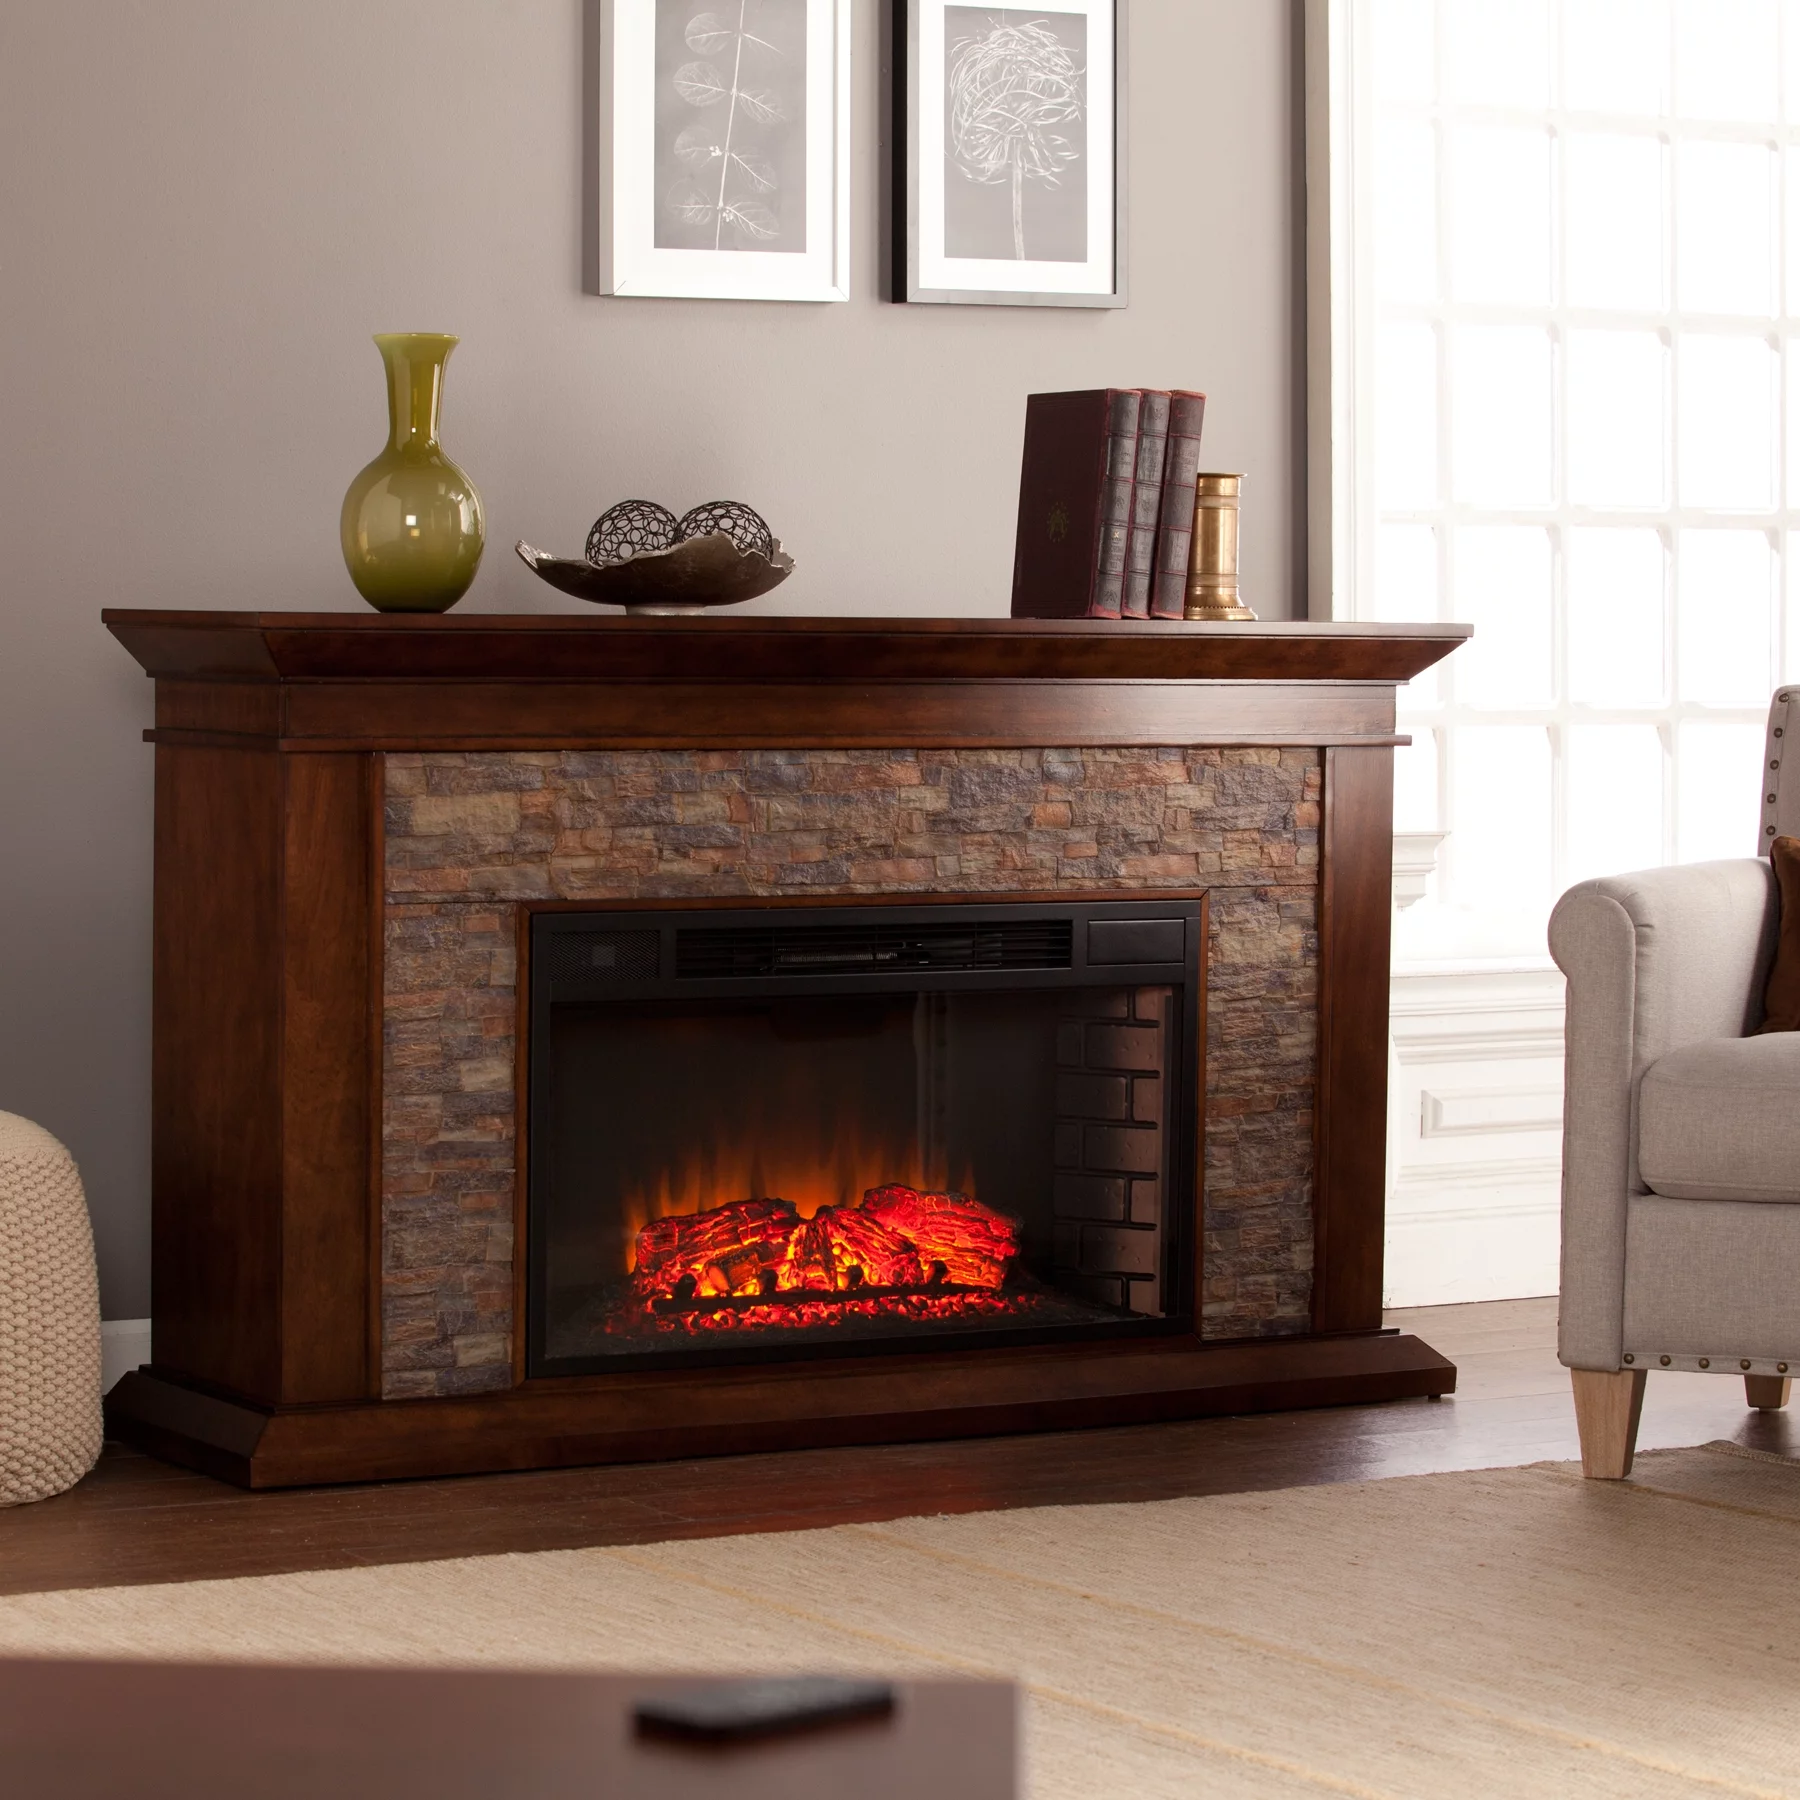 Sei Bodilla Traditional style Electric Fireplace in Whiskey maple with Durango faux stone finish